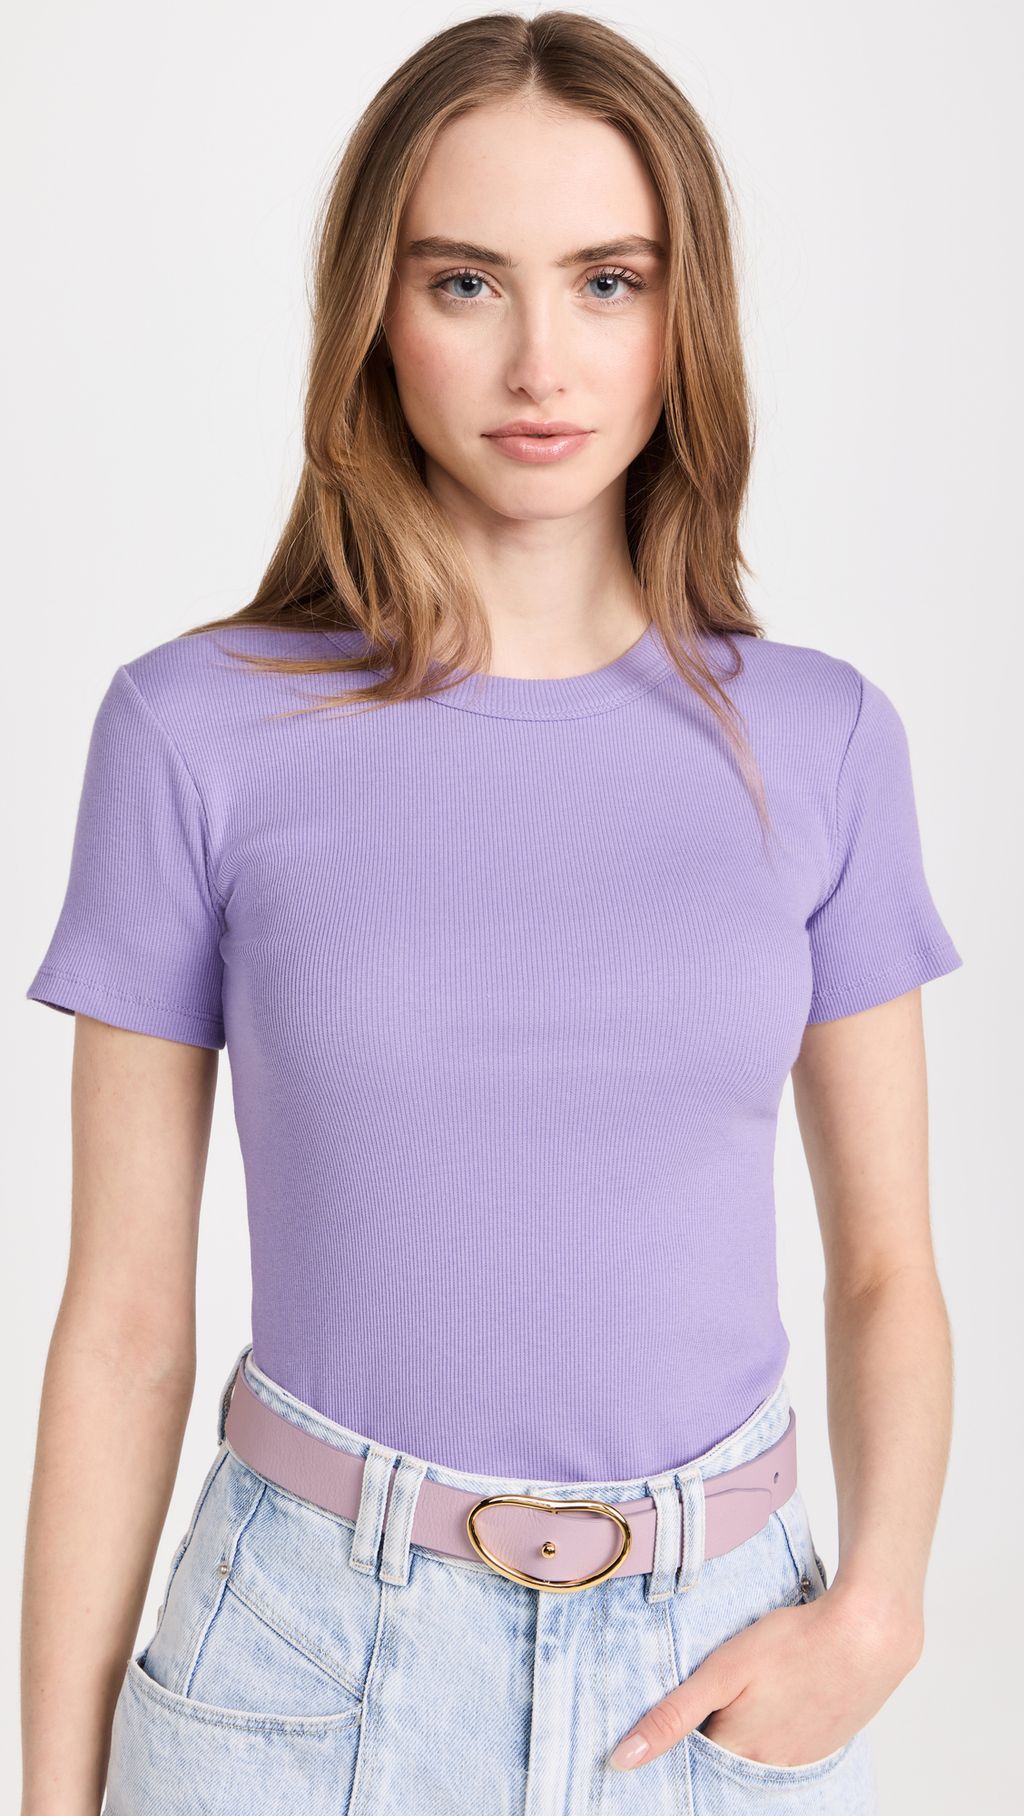 36 Lavender Pieces That Are So Pretty for Spring | Who What Wear